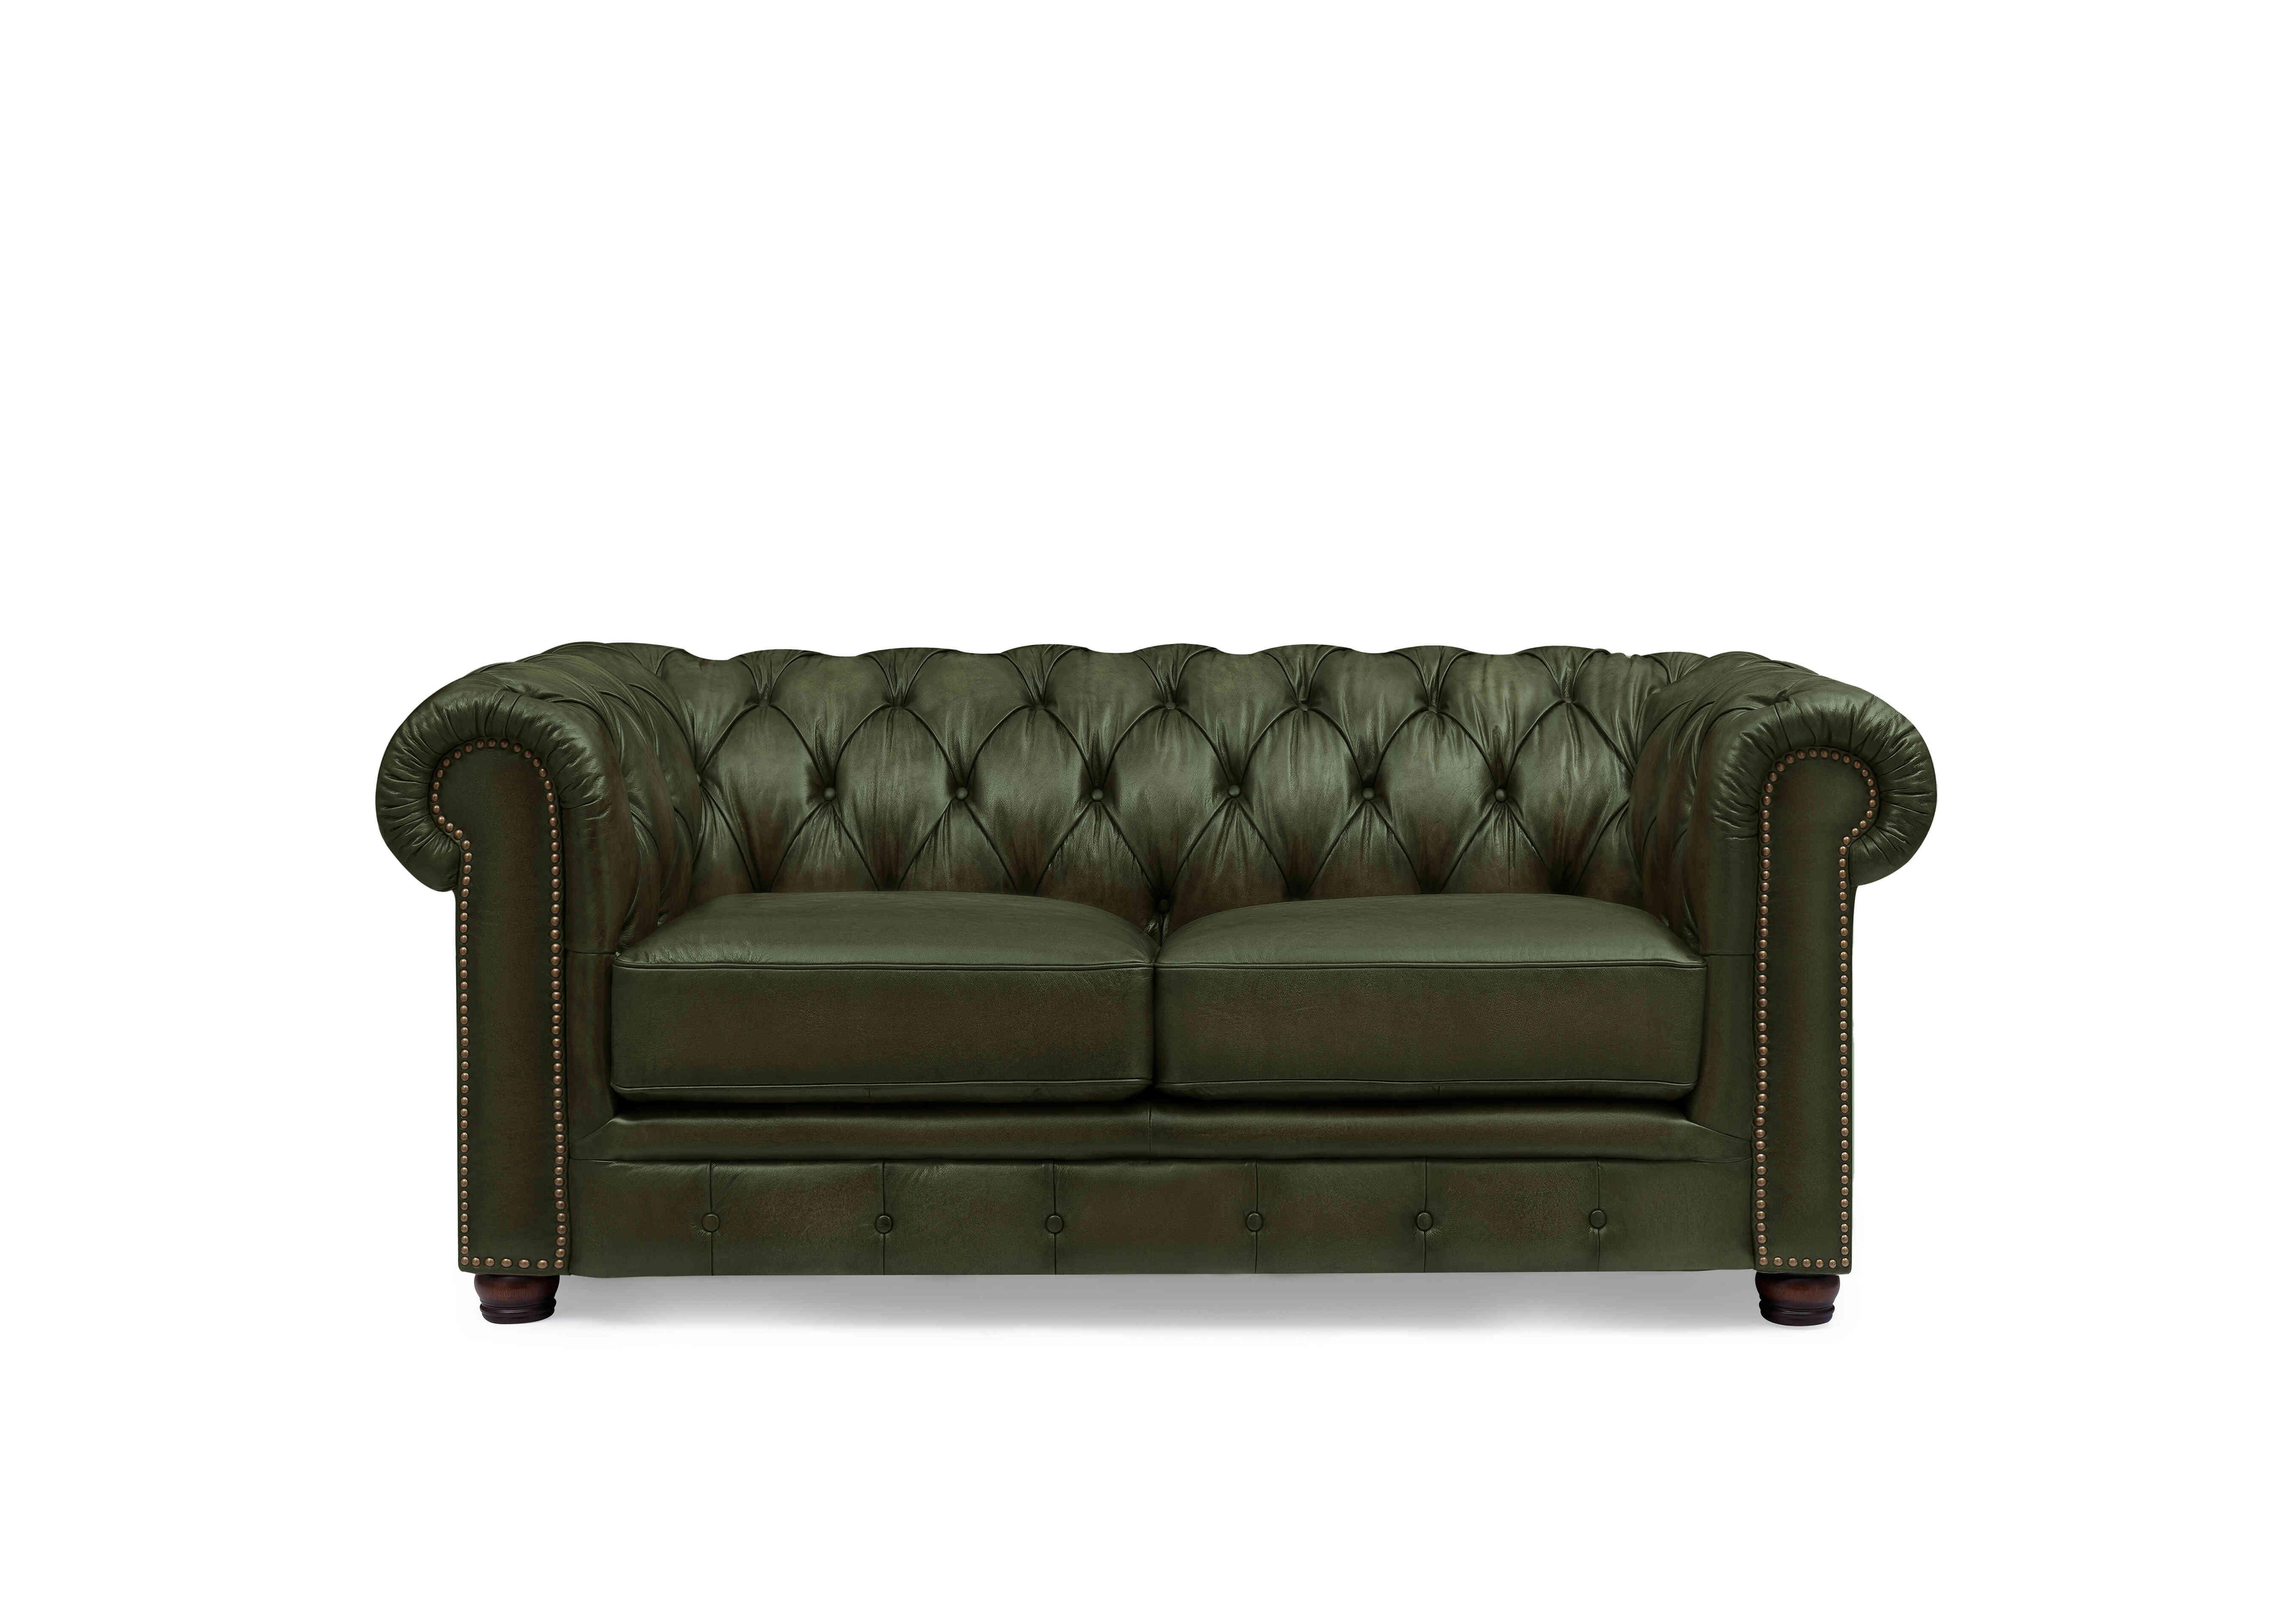 Shackleton 2 Seater Leather Chesterfield Sofa in X3y1-1965ls Emerald on Furniture Village